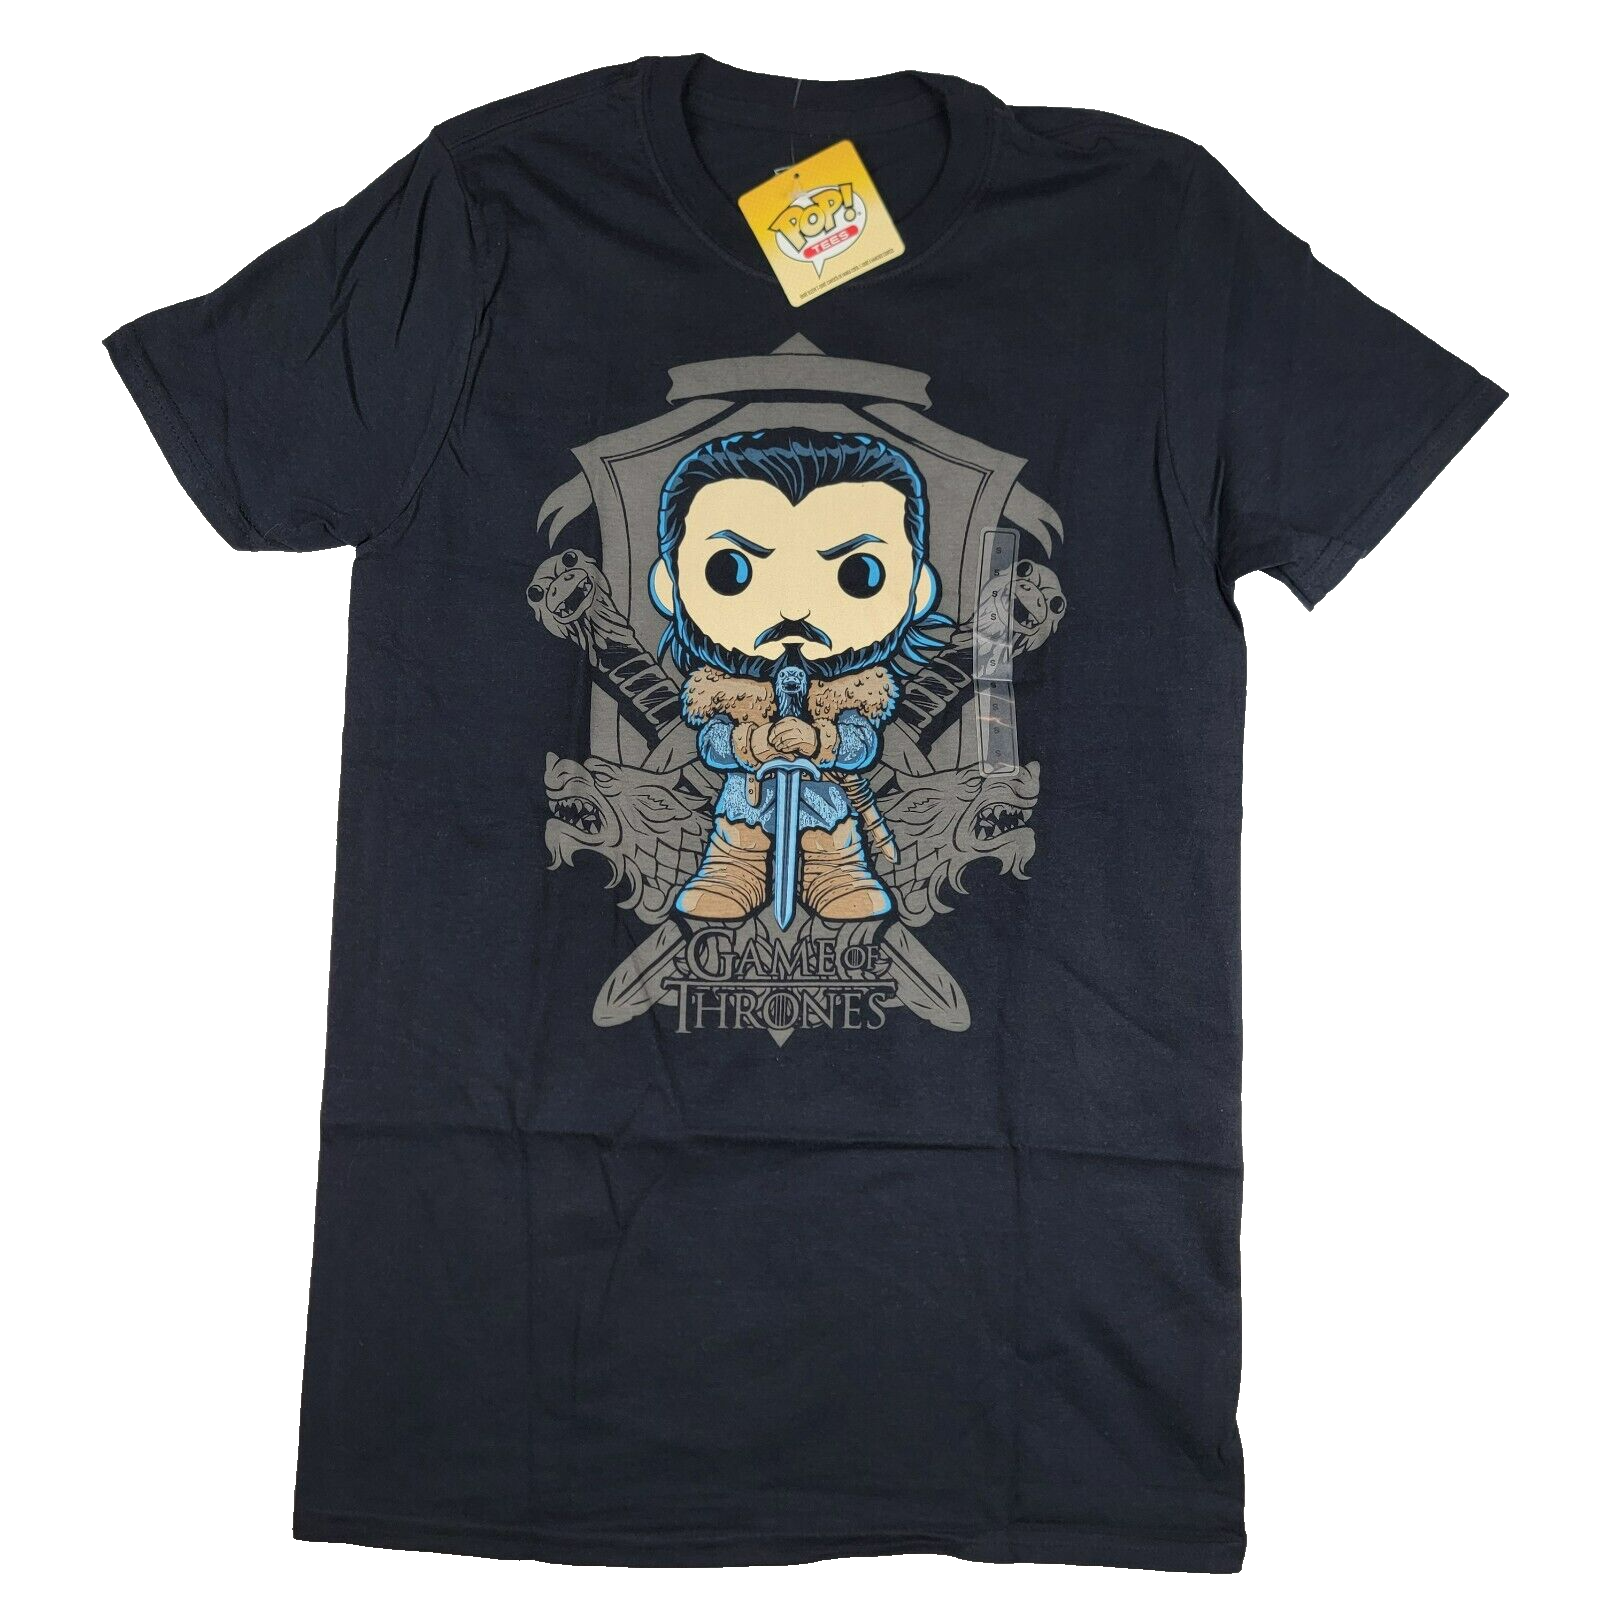 Primary image for Funko Pop! Tees Game of Thrones Jon Snow Size Small T-Shirt